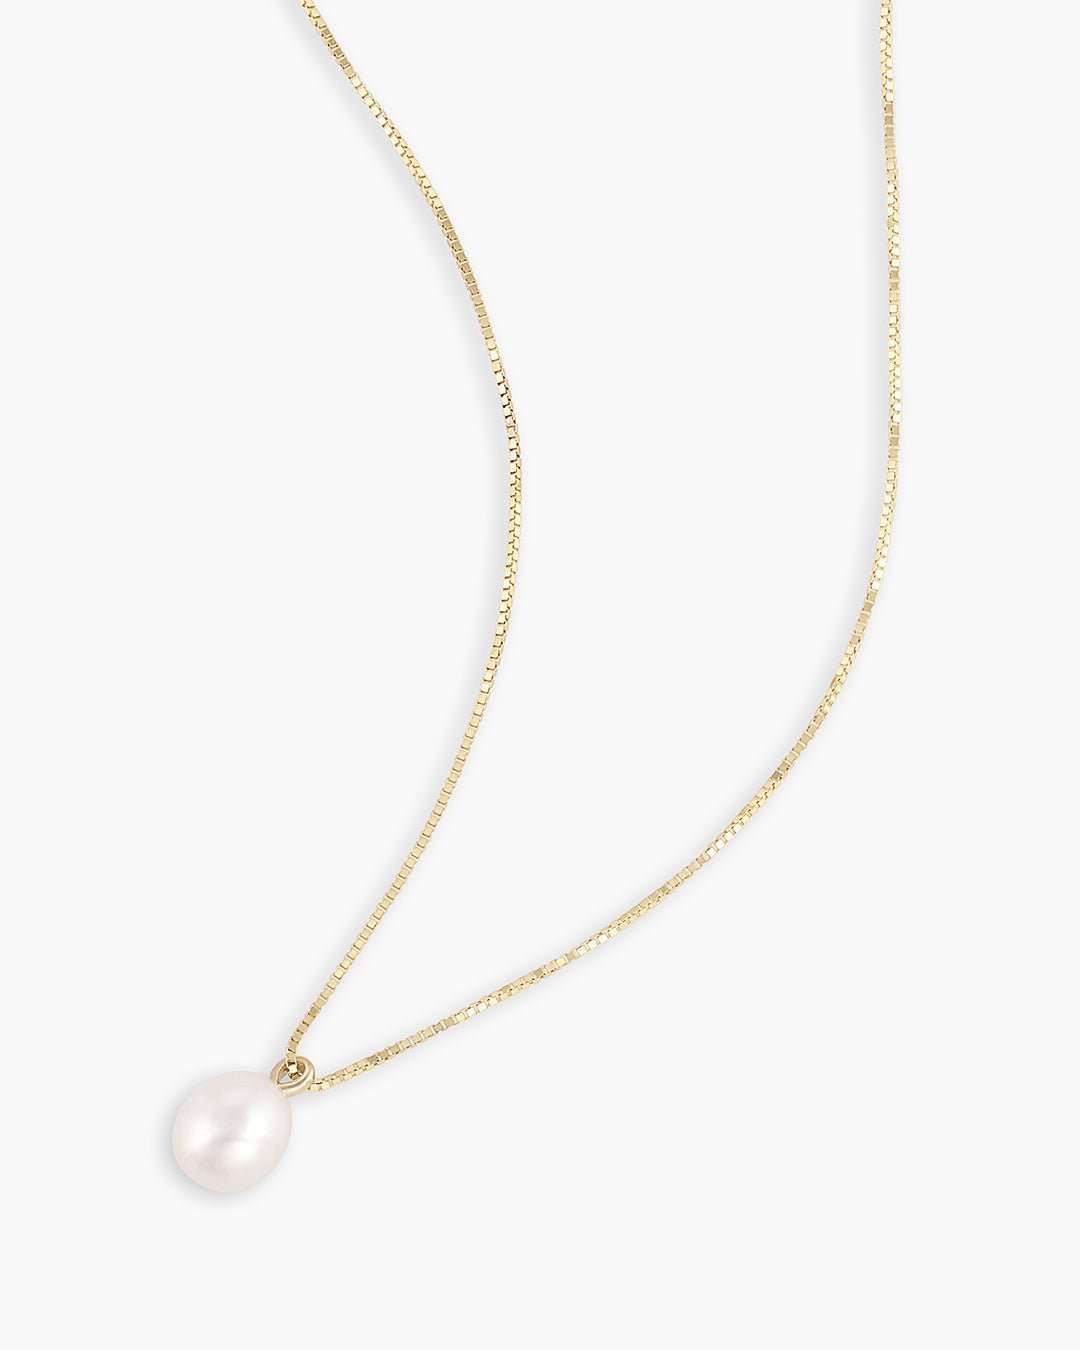 Pearl Charm Necklace in 14K Solid Gold, Women's by Gorjana